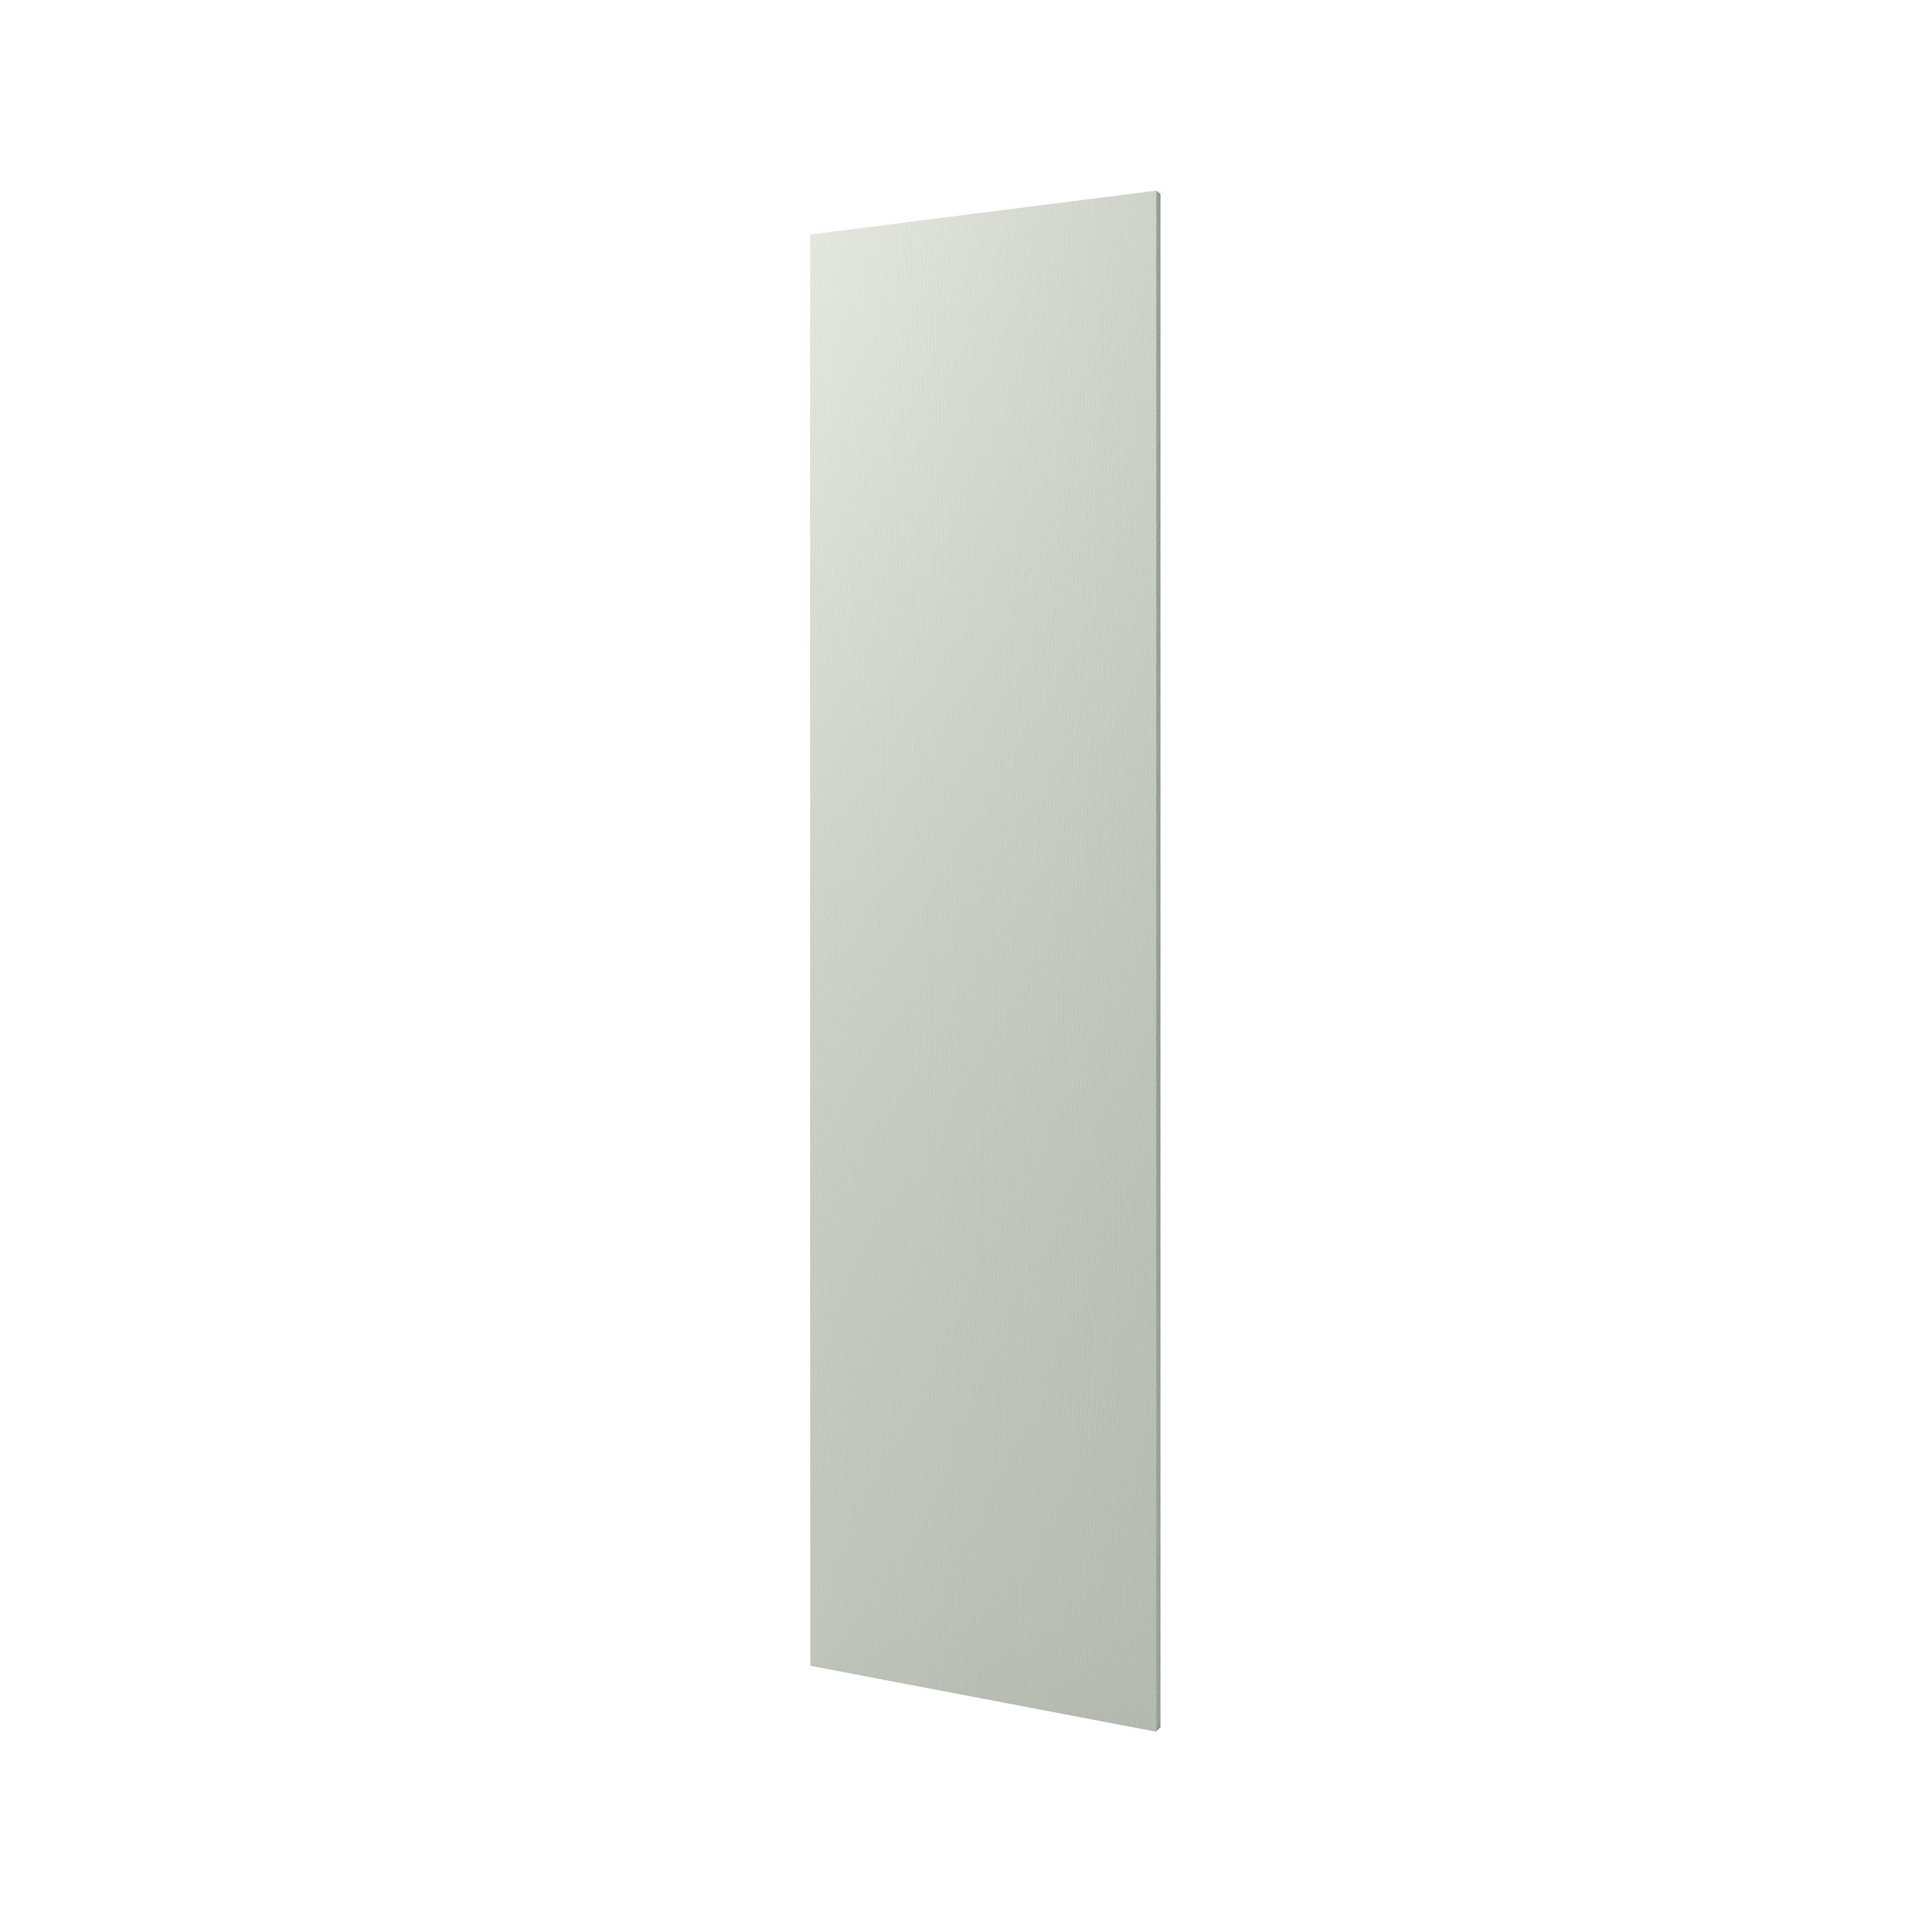 GoodHome Alpinia Matt grey painted wood effect shaker Tall Clad on end panel (H)2400mm (W)610mm